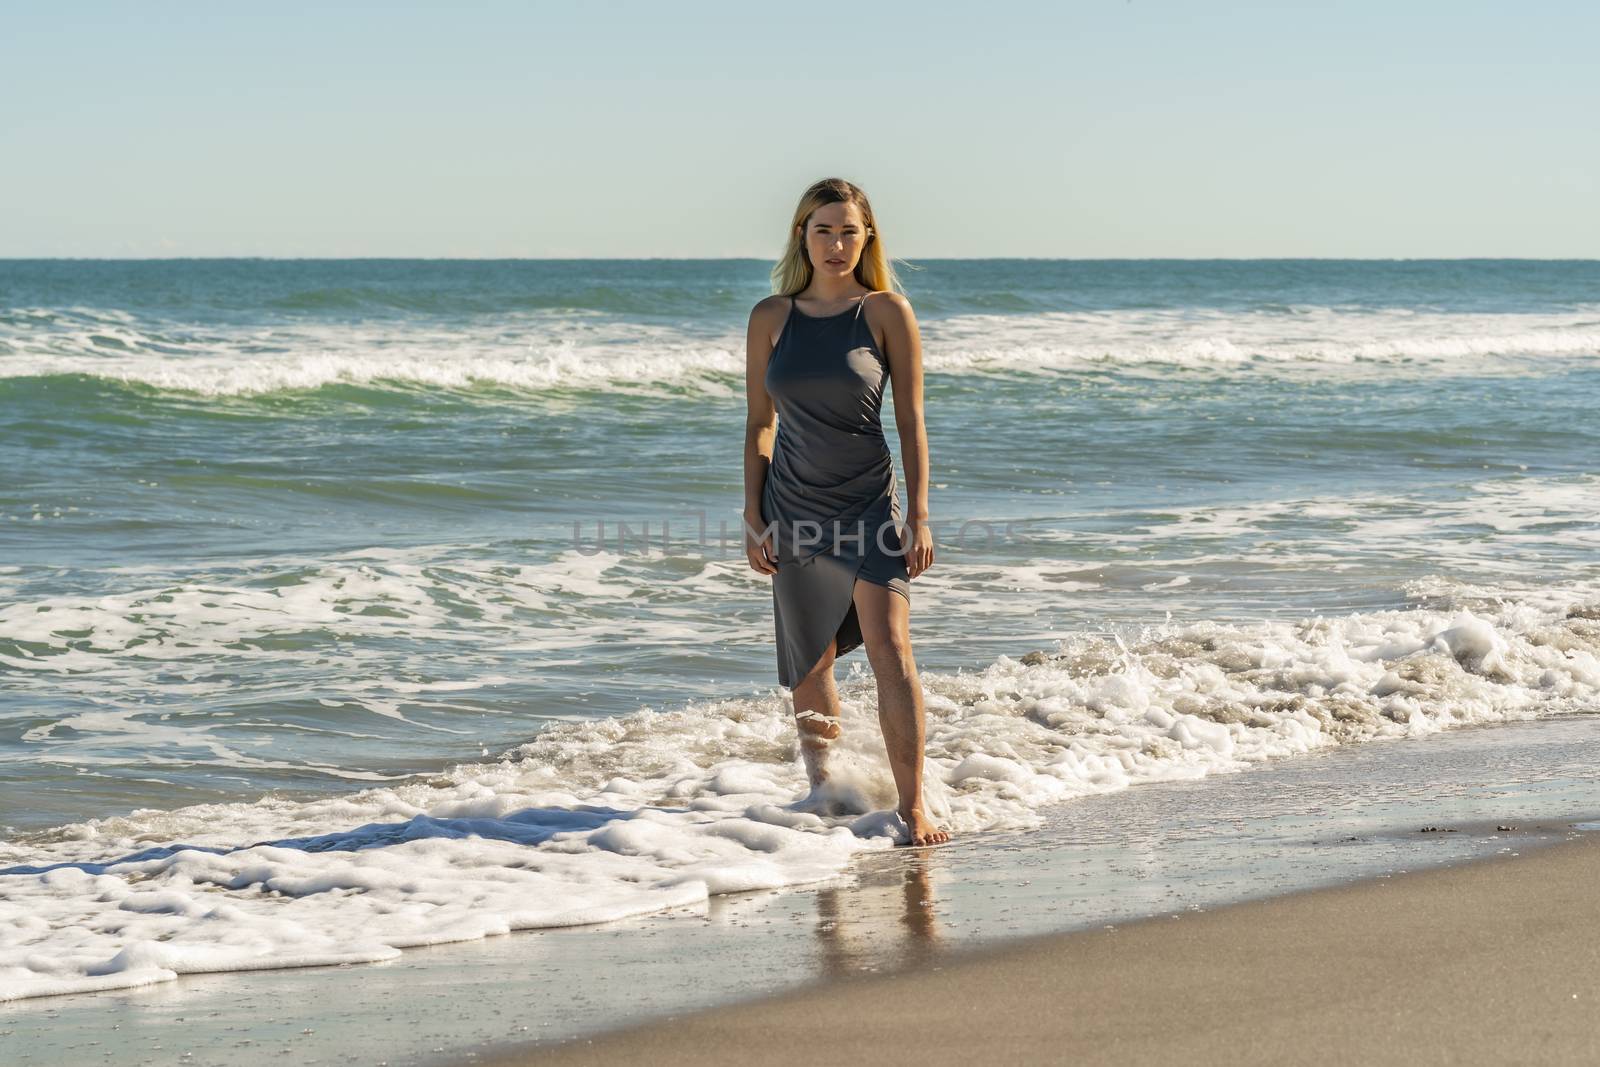 Beautiful Blonde Model Poses On A Beach Alone by actionsports